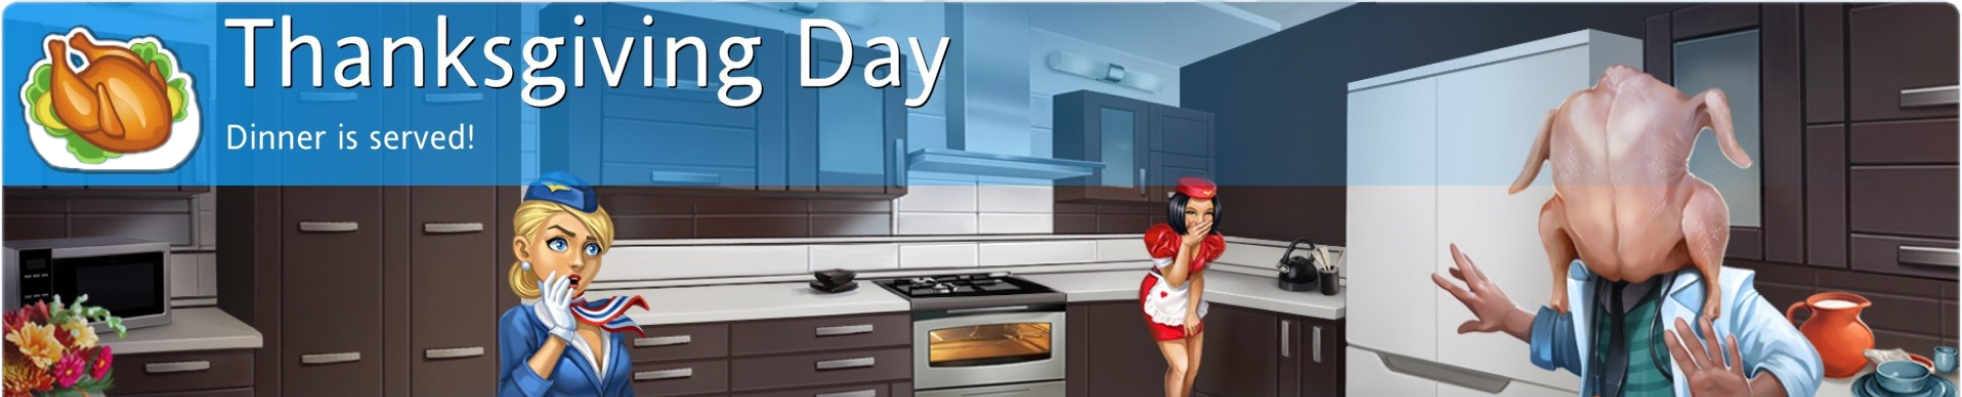 thanksgiving_day_banner.png